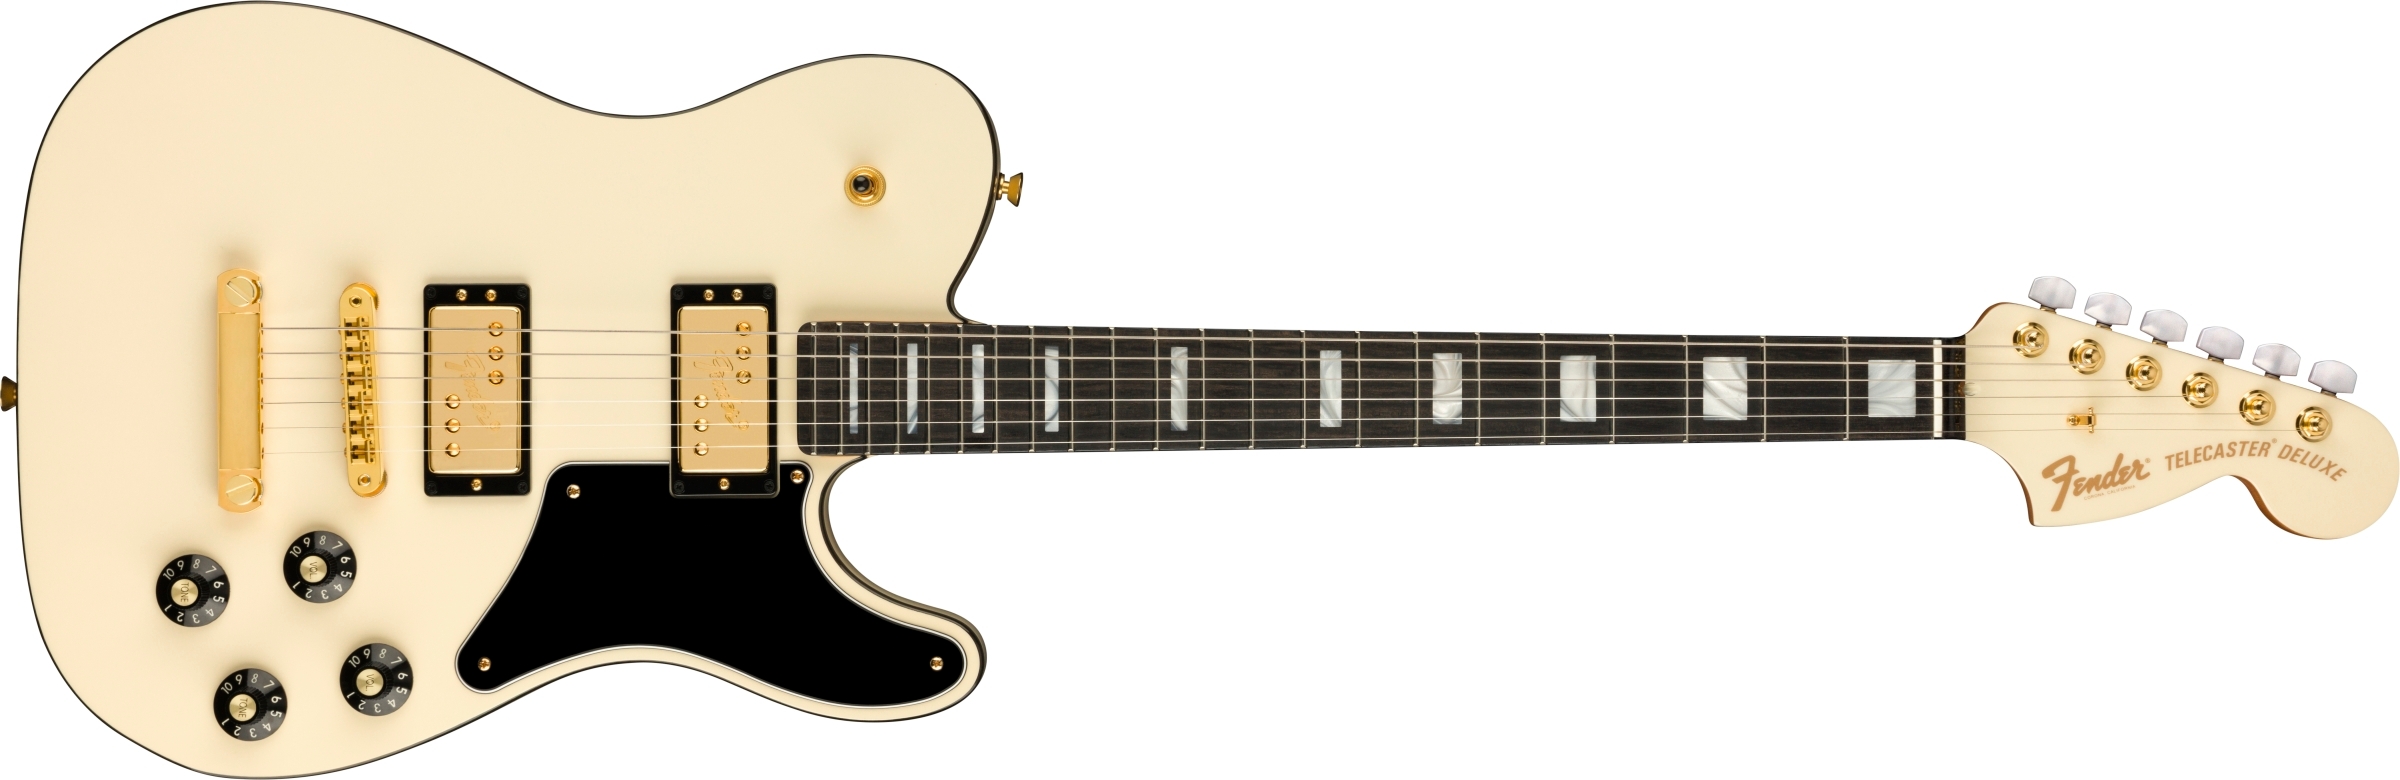 Fender USA Troublemaker Tele Deluxe楽器